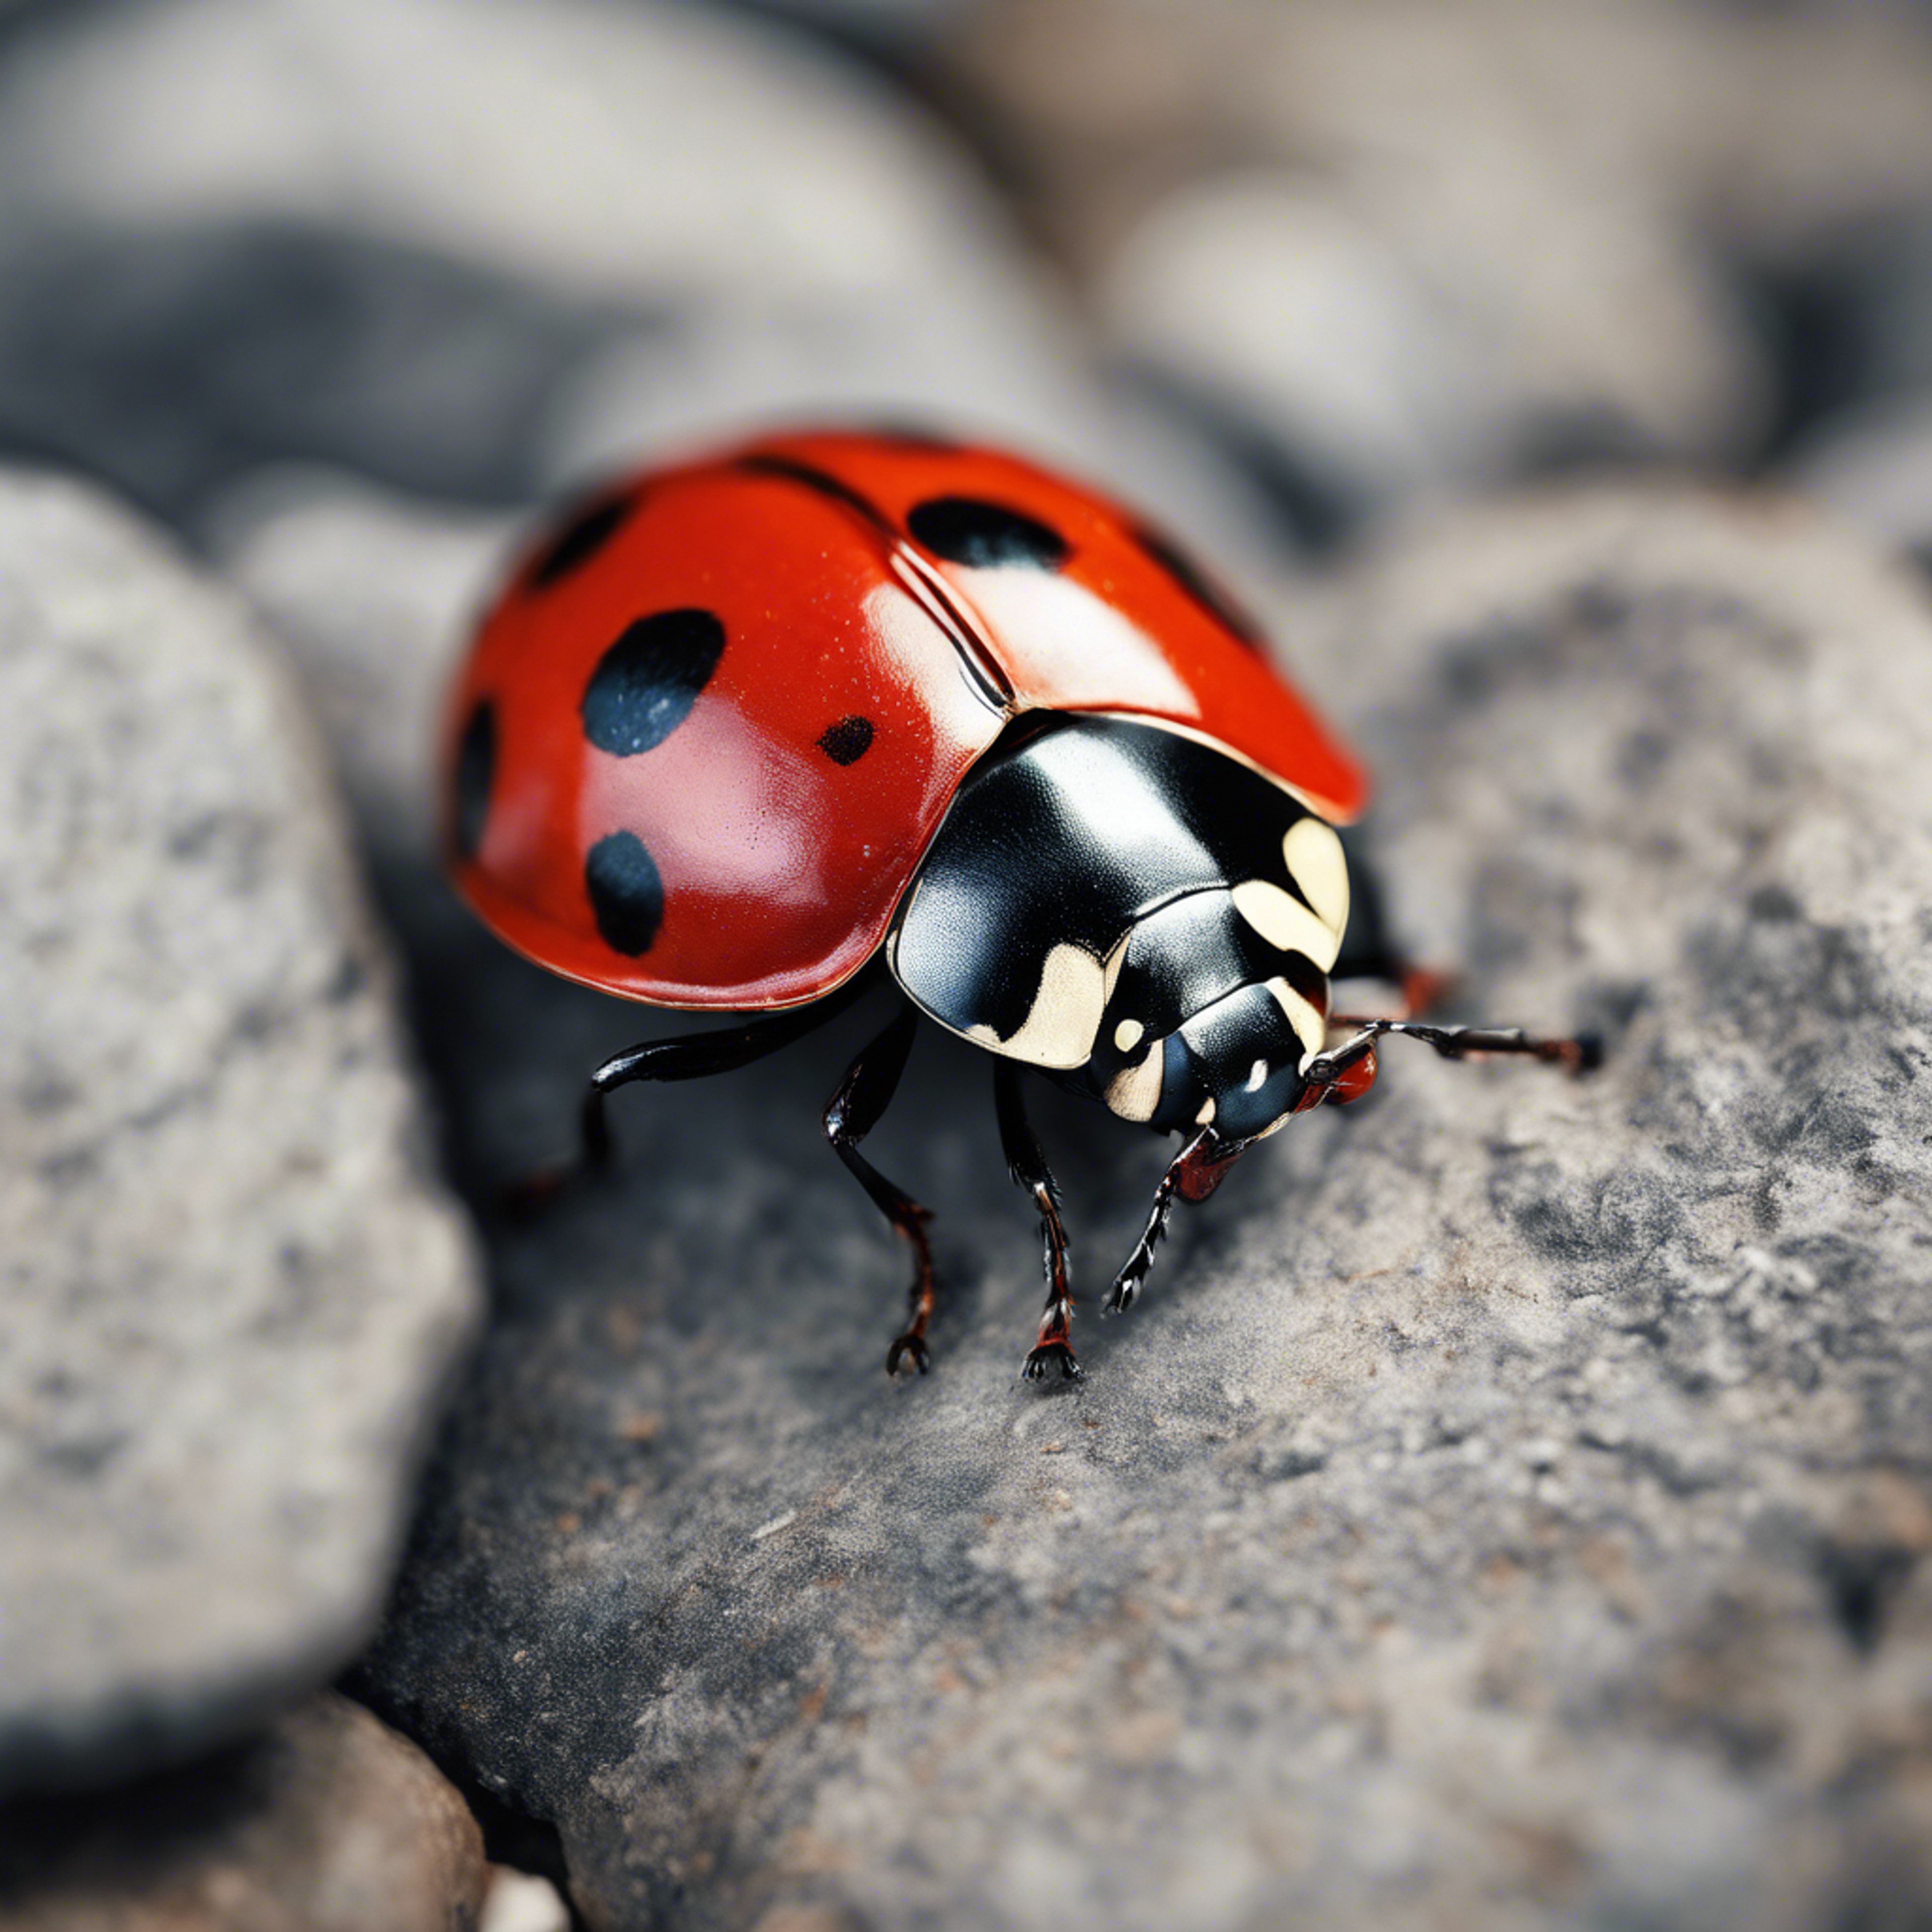 A fearless ladybug with bright red wings crawling over a dull, grey stone. Ფონი[cb02e673ce6f479eab40]